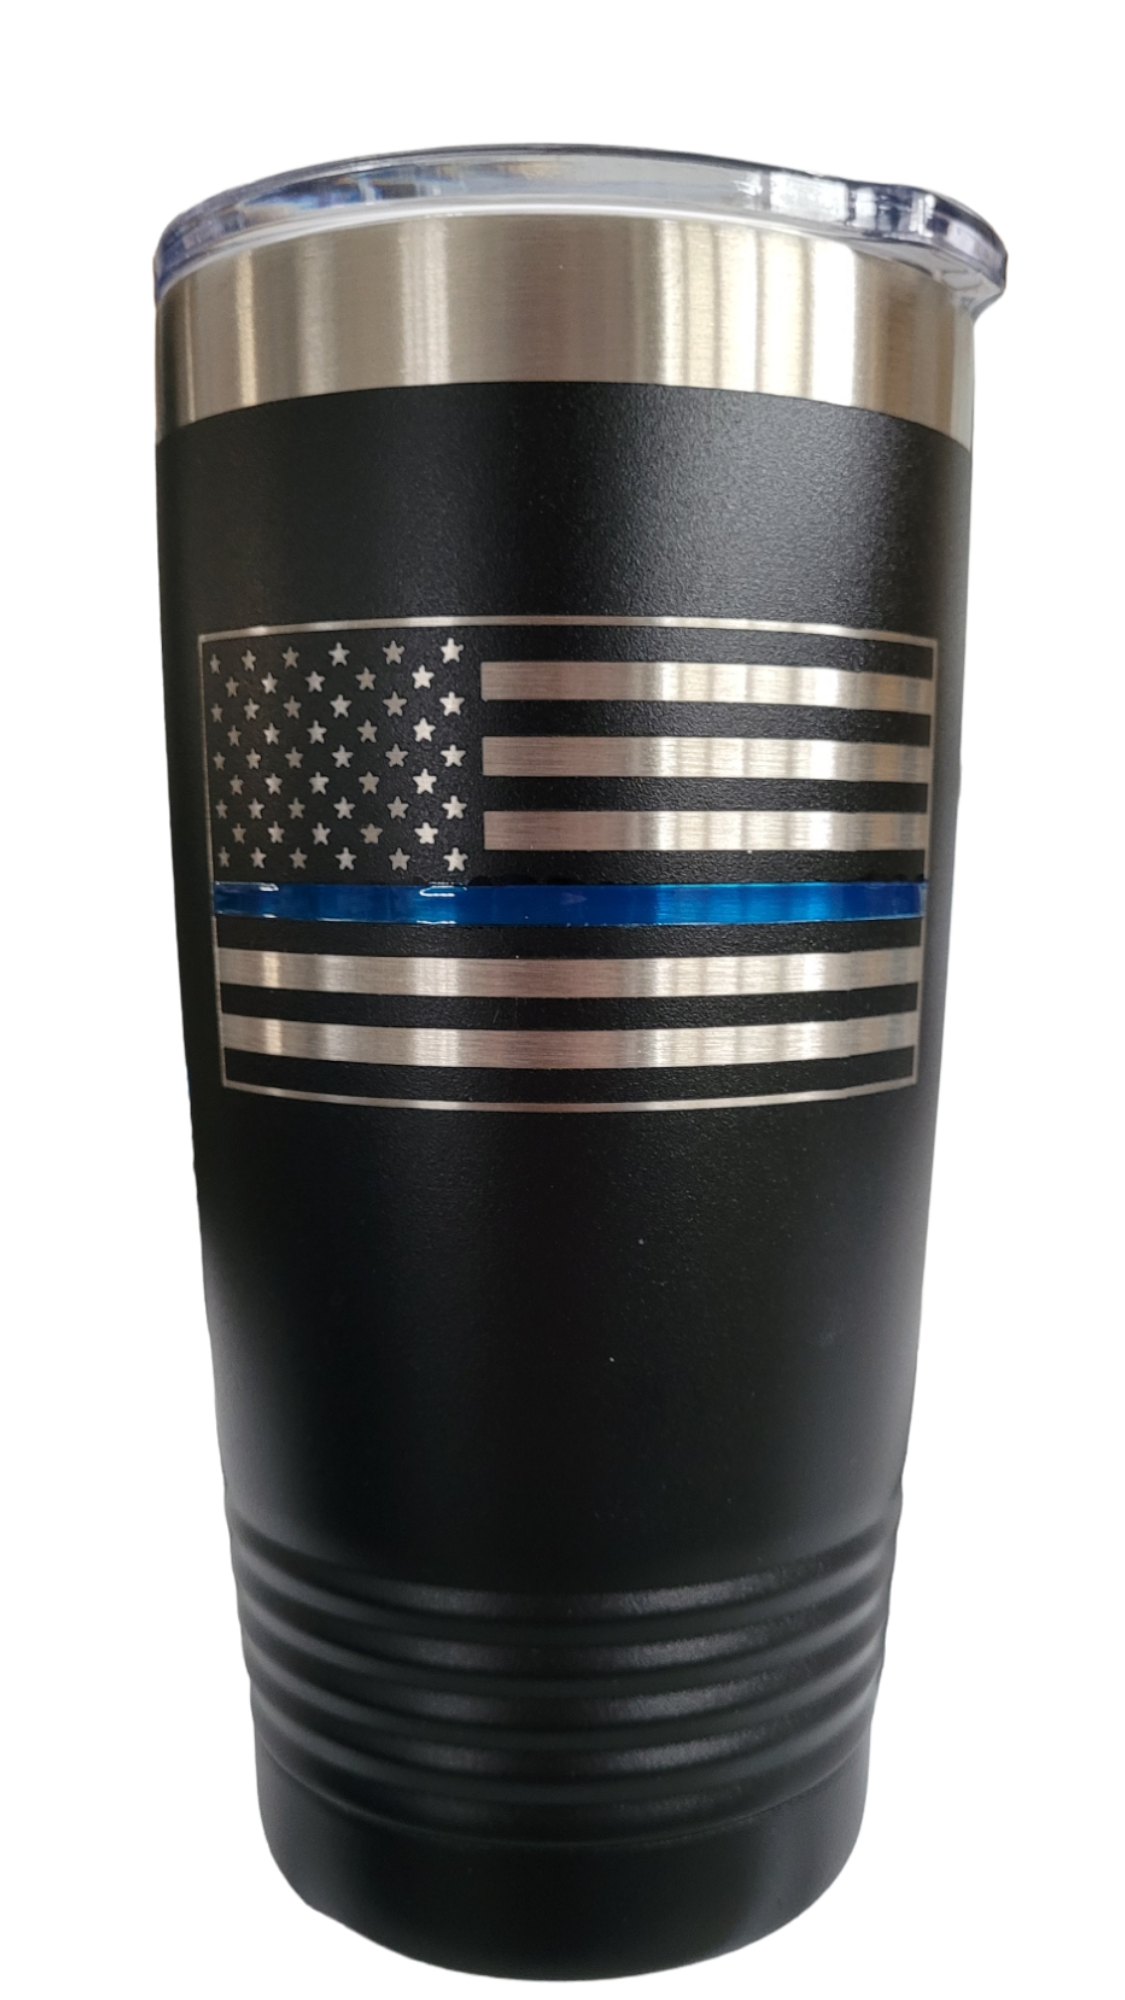 Engraved 20 oz Tumbler - Ringneck Vacuum Insulated with Lid